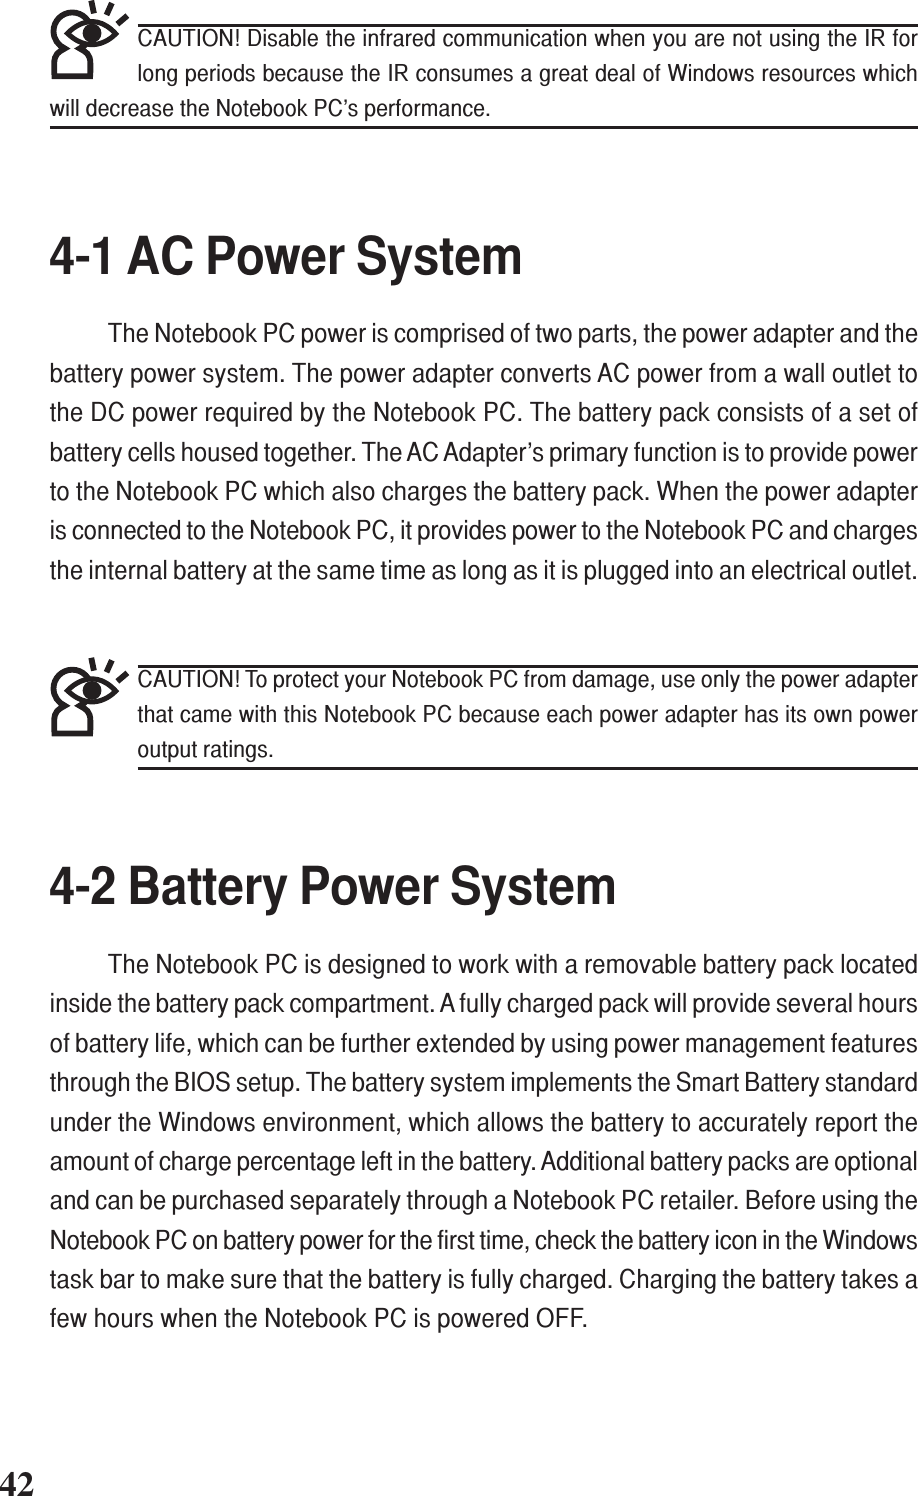 +-424-1 AC Power SystemThe Notebook PC power is comprised of two parts, the power adapter and thebattery power system. The power adapter converts AC power from a wall outlet tothe DC power required by the Notebook PC. The battery pack consists of a set ofbattery cells housed together. The AC Adapter’s primary function is to provide powerto the Notebook PC which also charges the battery pack. When the power adapteris connected to the Notebook PC, it provides power to the Notebook PC and chargesthe internal battery at the same time as long as it is plugged into an electrical outlet.4-2 Battery Power SystemThe Notebook PC is designed to work with a removable battery pack locatedinside the battery pack compartment. A fully charged pack will provide several hoursof battery life, which can be further extended by using power management featuresthrough the BIOS setup. The battery system implements the Smart Battery standardunder the Windows environment, which allows the battery to accurately report theamount of charge percentage left in the battery. Additional battery packs are optionaland can be purchased separately through a Notebook PC retailer. Before using theNotebook PC on battery power for the first time, check the battery icon in the Windowstask bar to make sure that the battery is fully charged. Charging the battery takes afew hours when the Notebook PC is powered OFF.CAUTION! To protect your Notebook PC from damage, use only the power adapterthat came with this Notebook PC because each power adapter has its own poweroutput ratings.CAUTION! Disable the infrared communication when you are not using the IR forlong periods because the IR consumes a great deal of Windows resources whichwill decrease the Notebook PC’s performance.